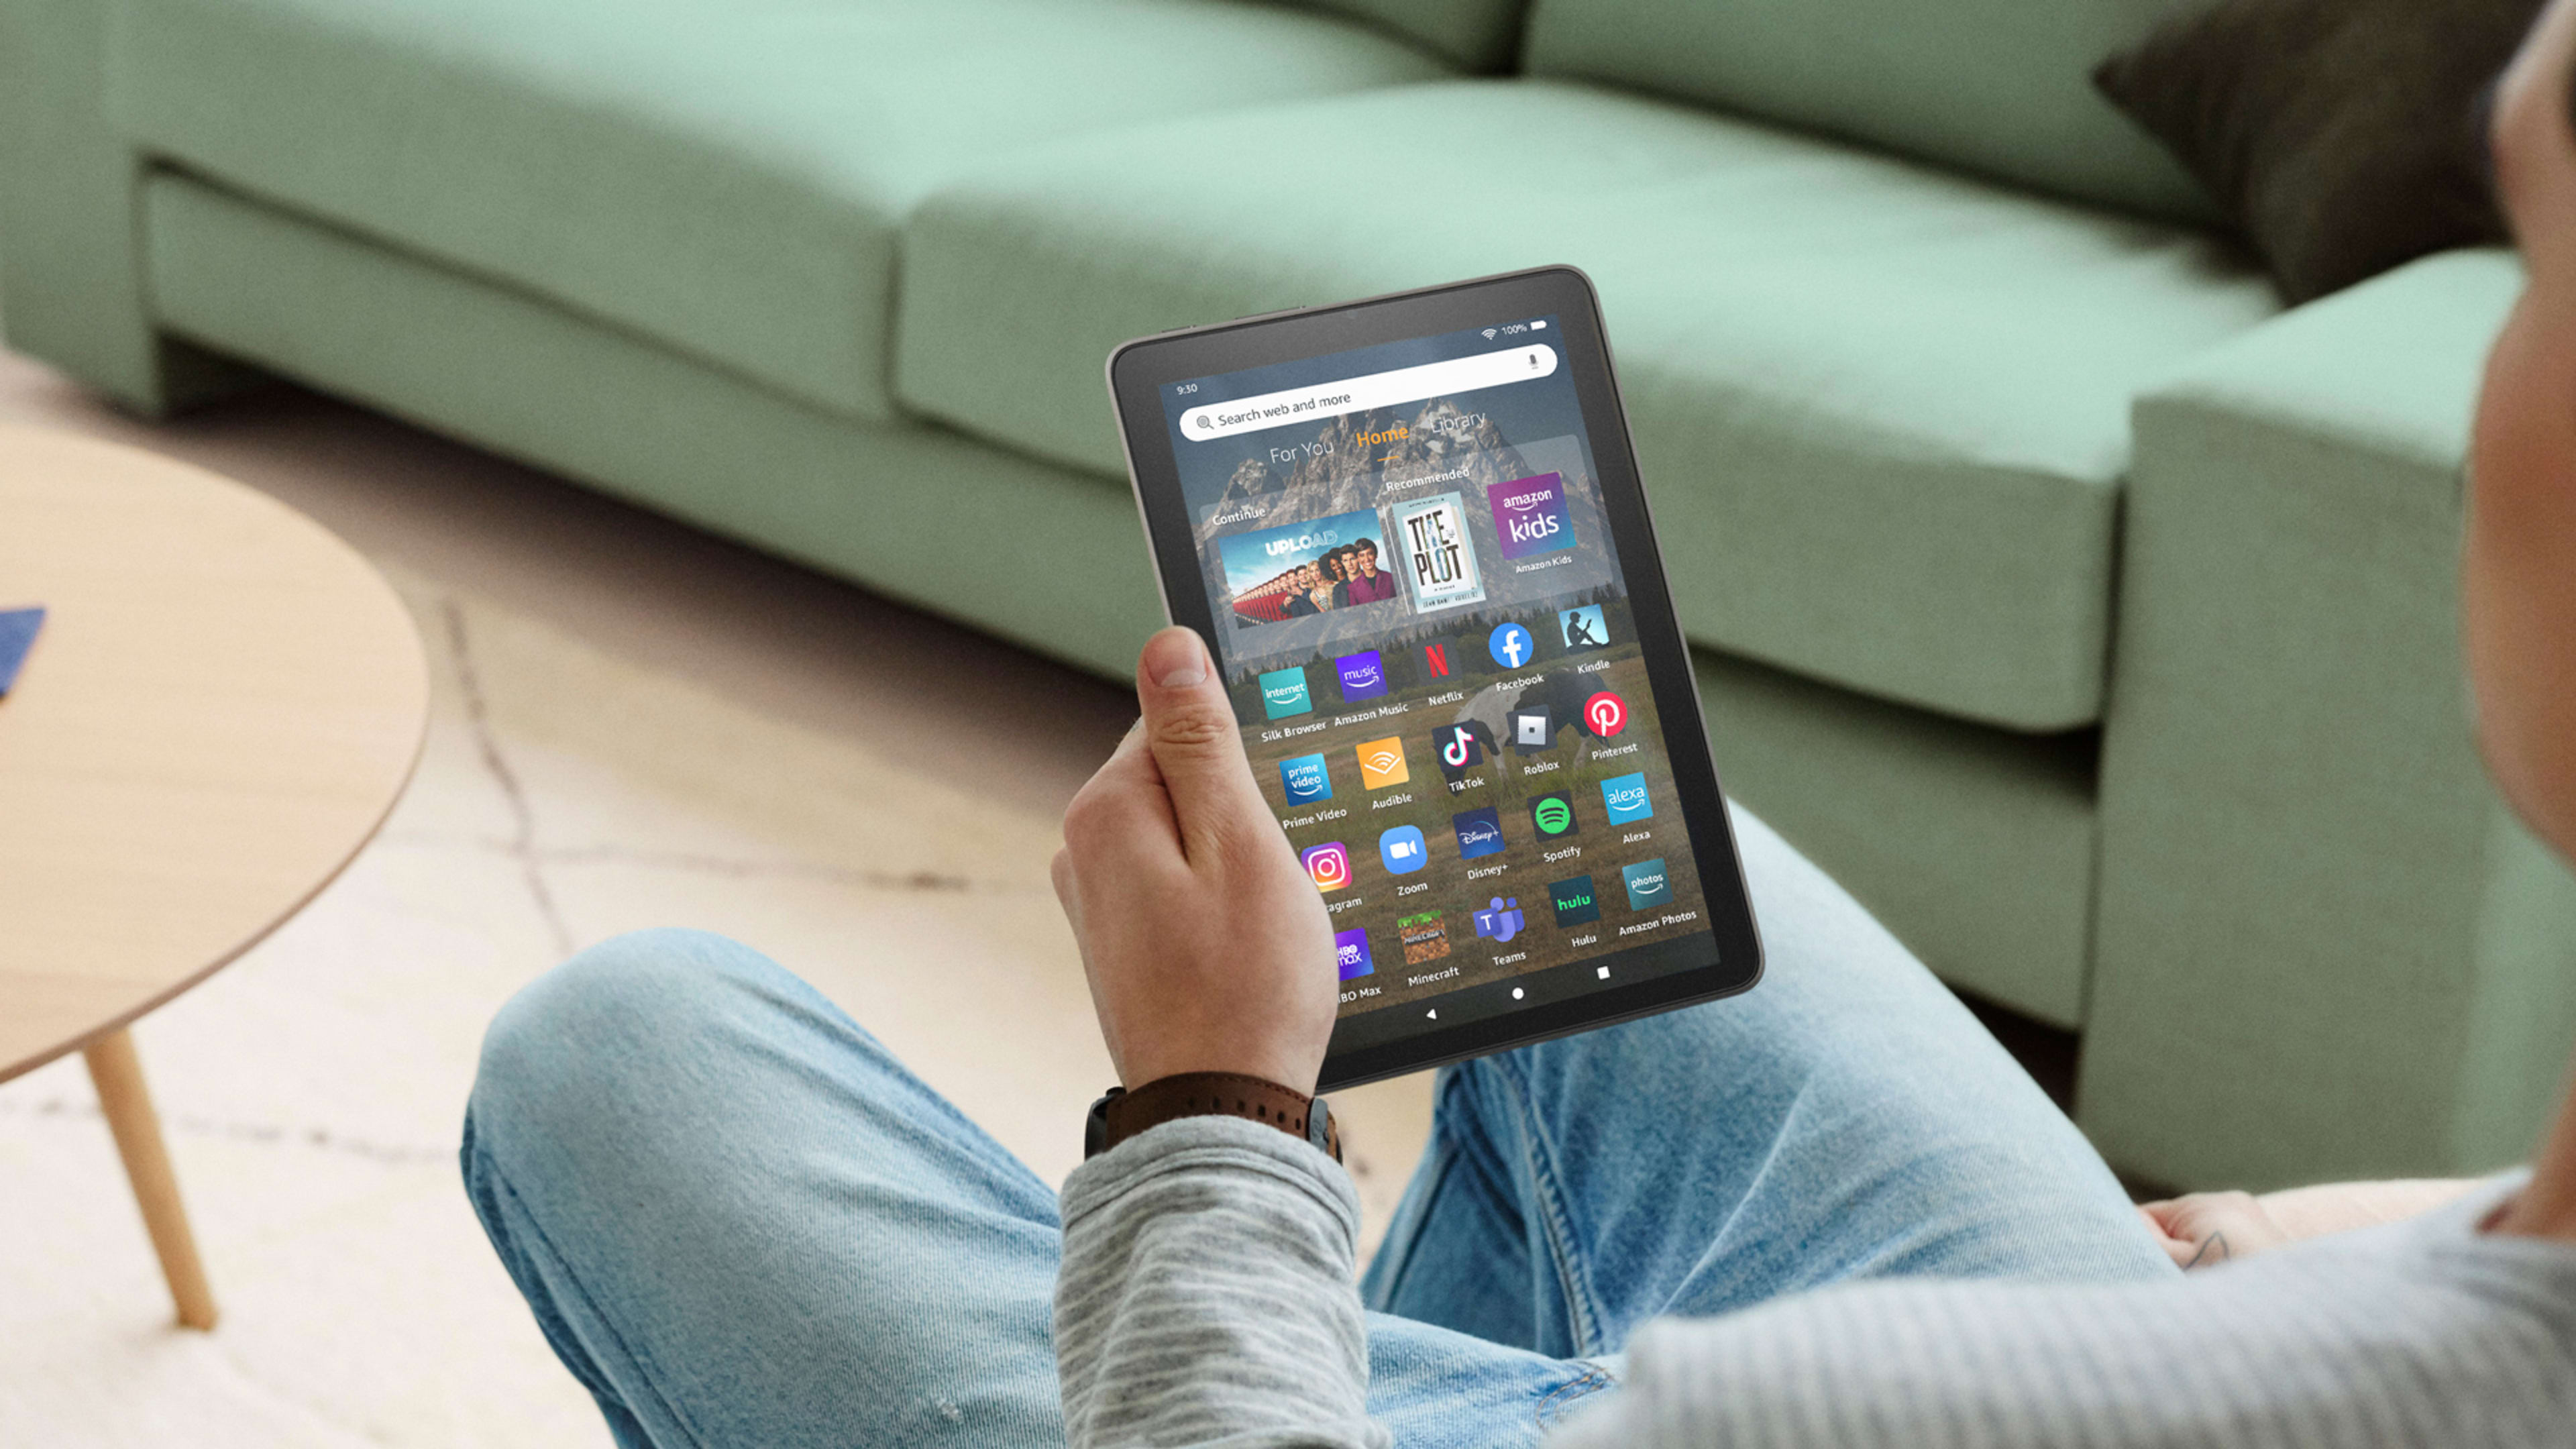 Amazon’s Fire HD 8 tablet would still be better with Google